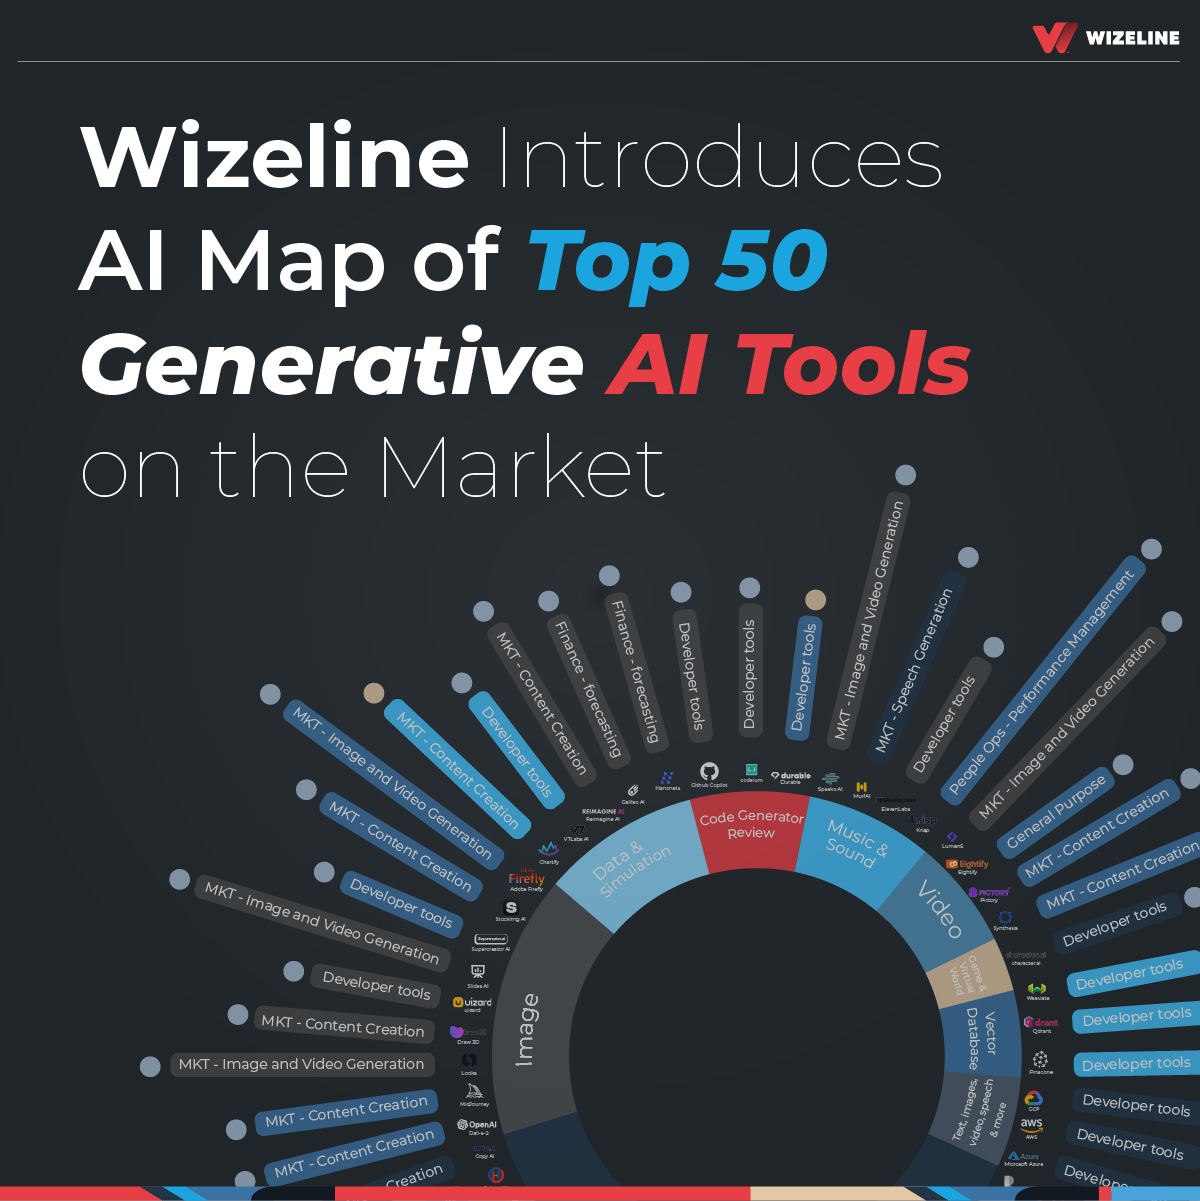 Wizeline Introduces Generative AI Map of Top 50 AI Tools on the Market